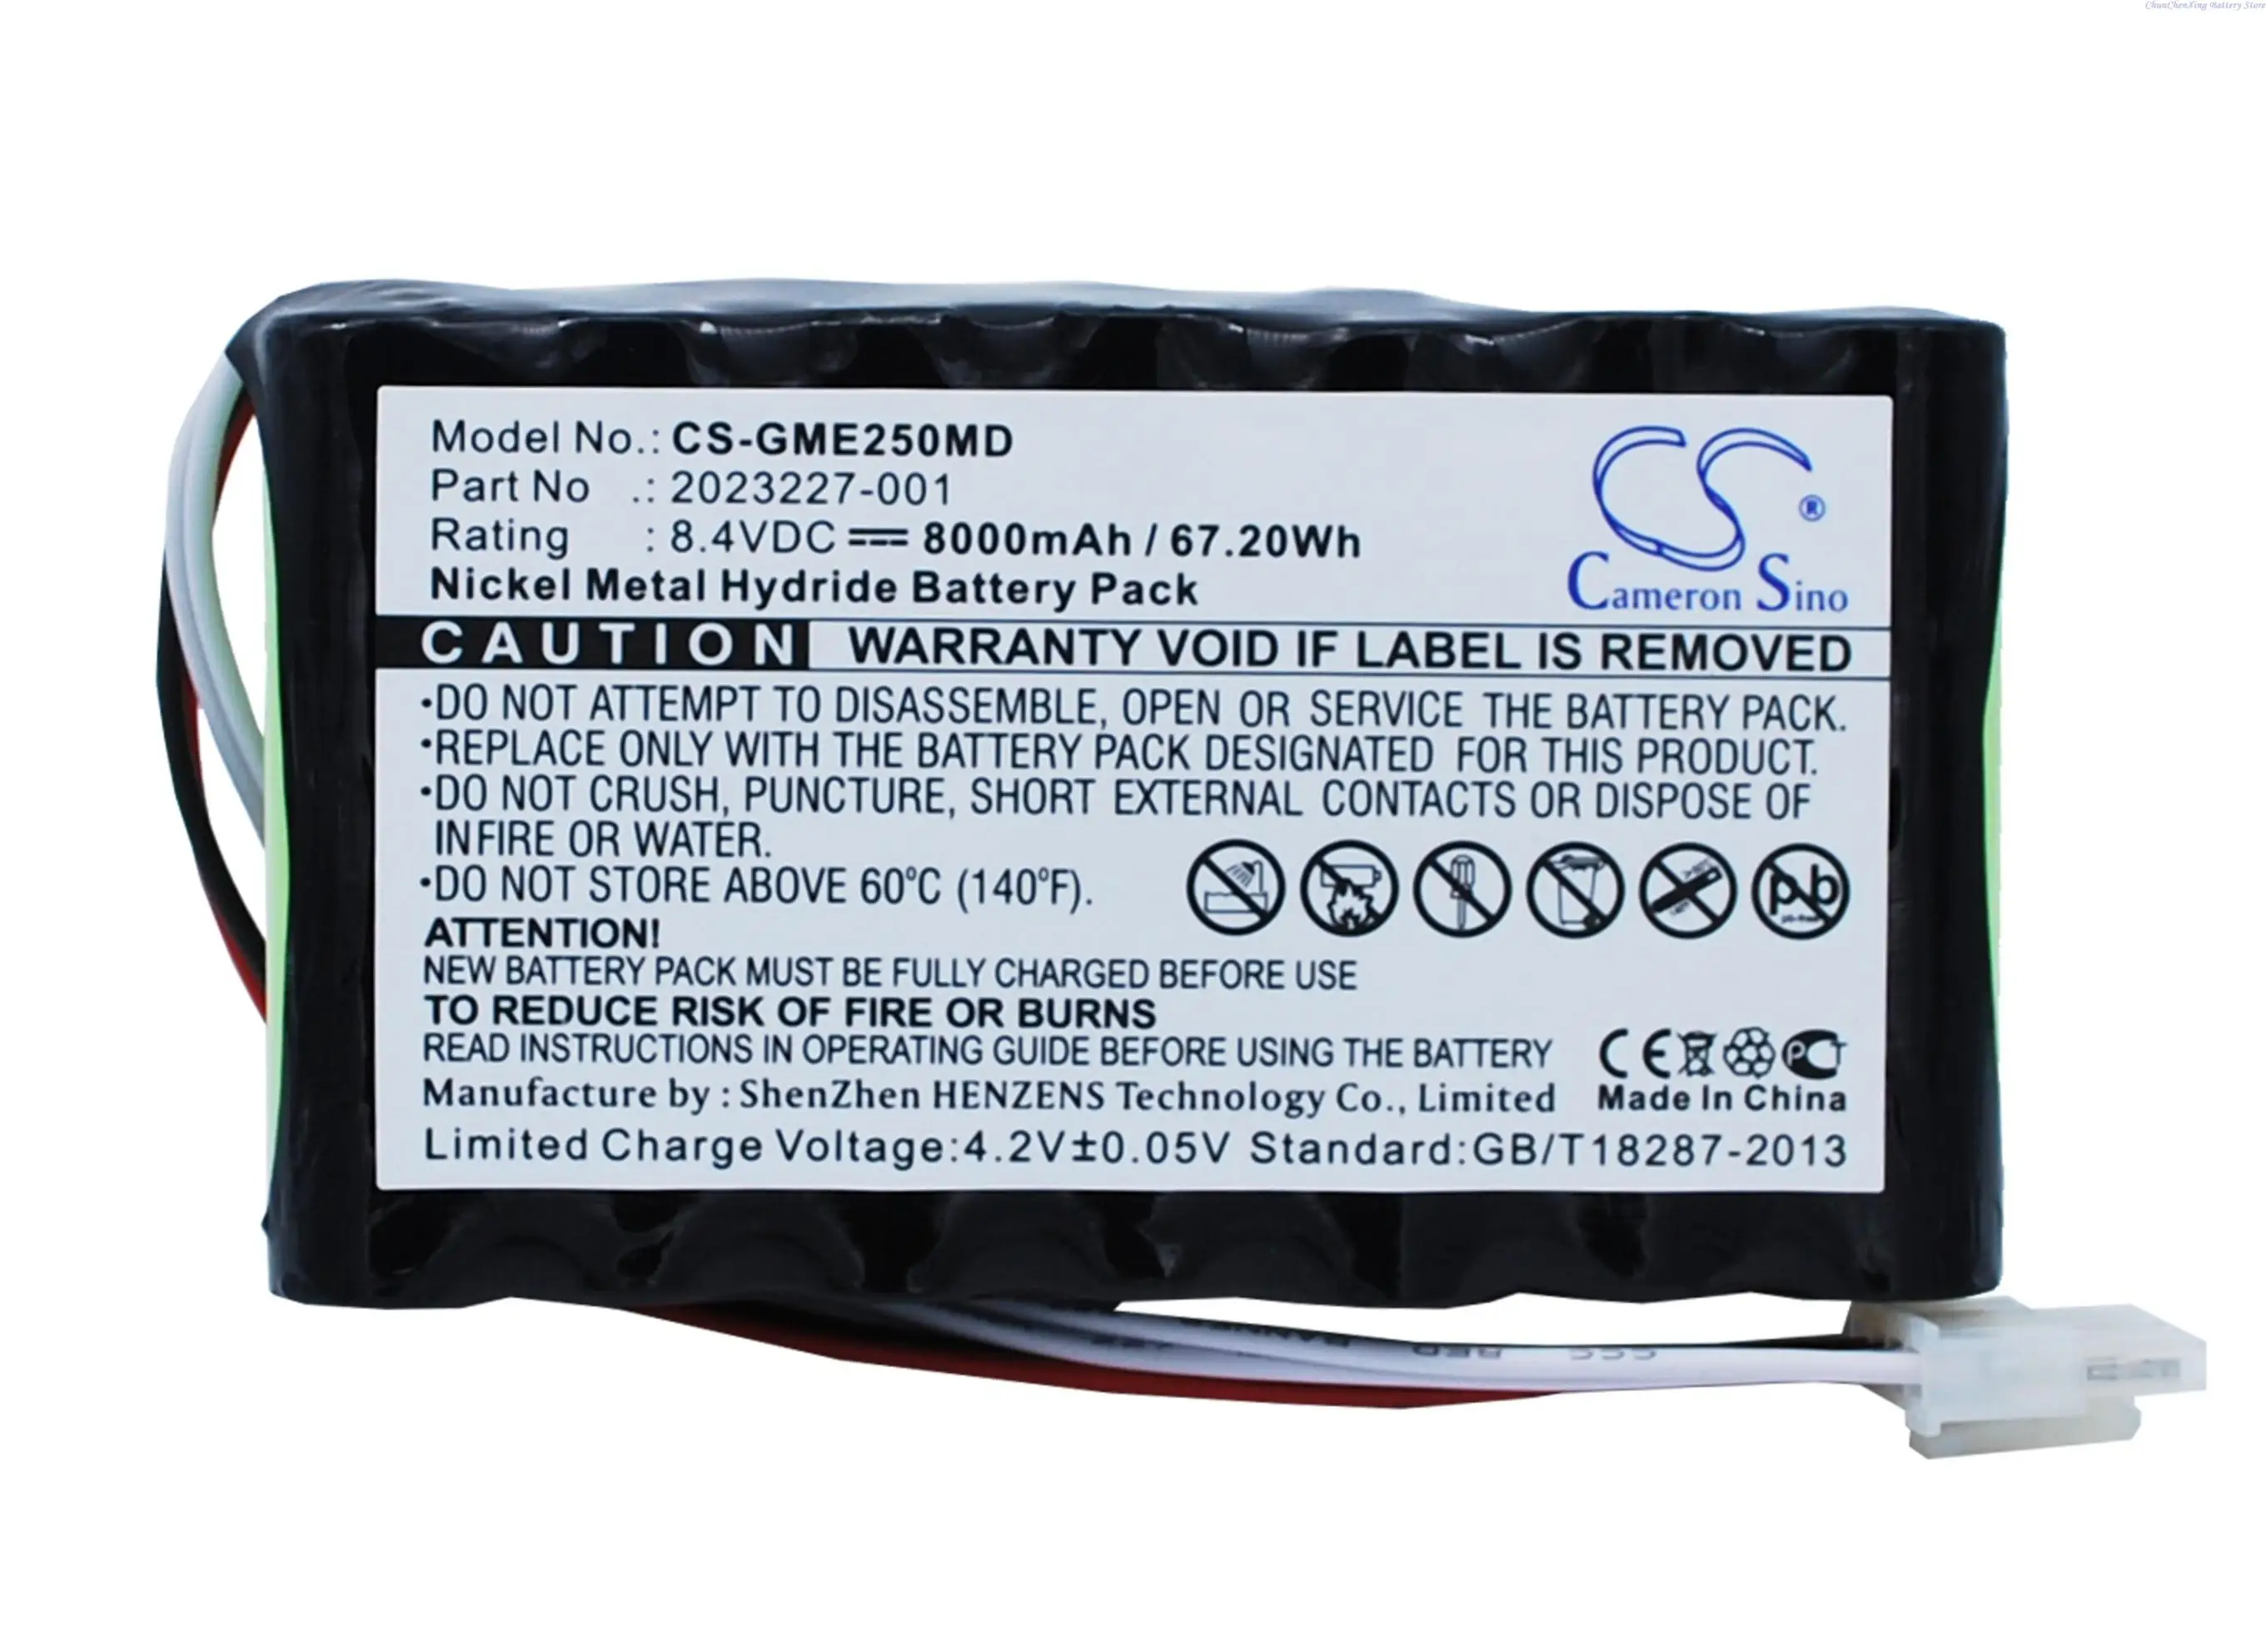 

CS 8.4V Ni-MH 8000mAh Medical Battery for Marquette Dash 2500, For Hellige Marquette MD 2500, Monitor Dash 2500 +tool and gifts